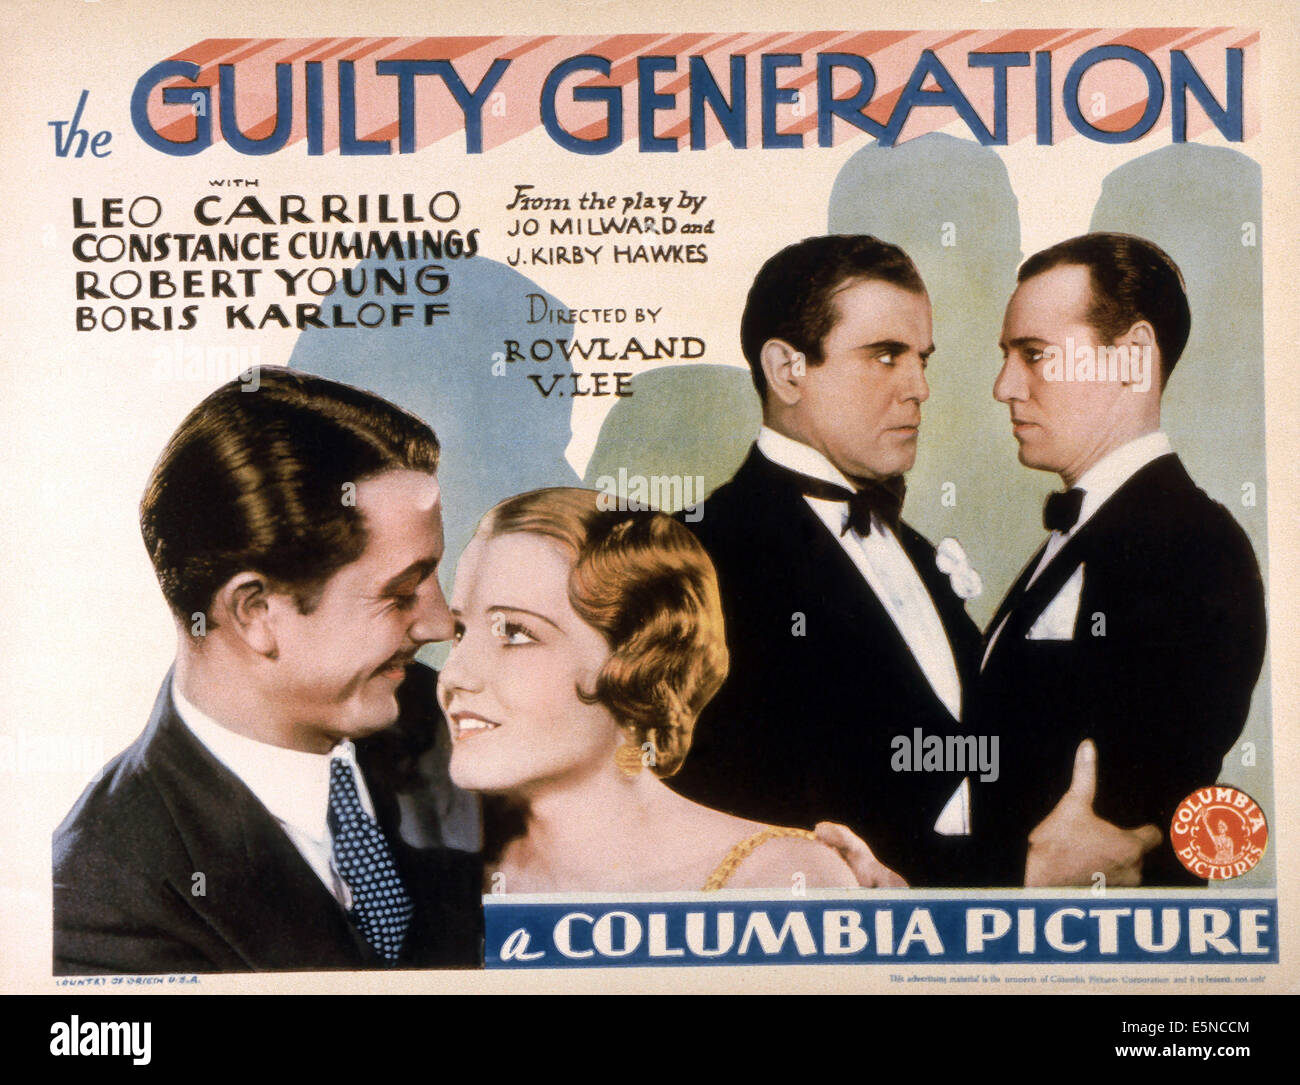 THE GUILTY GENERATION, front from left: Robert Young, Constance Cummings, rear from left: Leo Carrillo, Leslie Fenton, 1931 Stock Photo